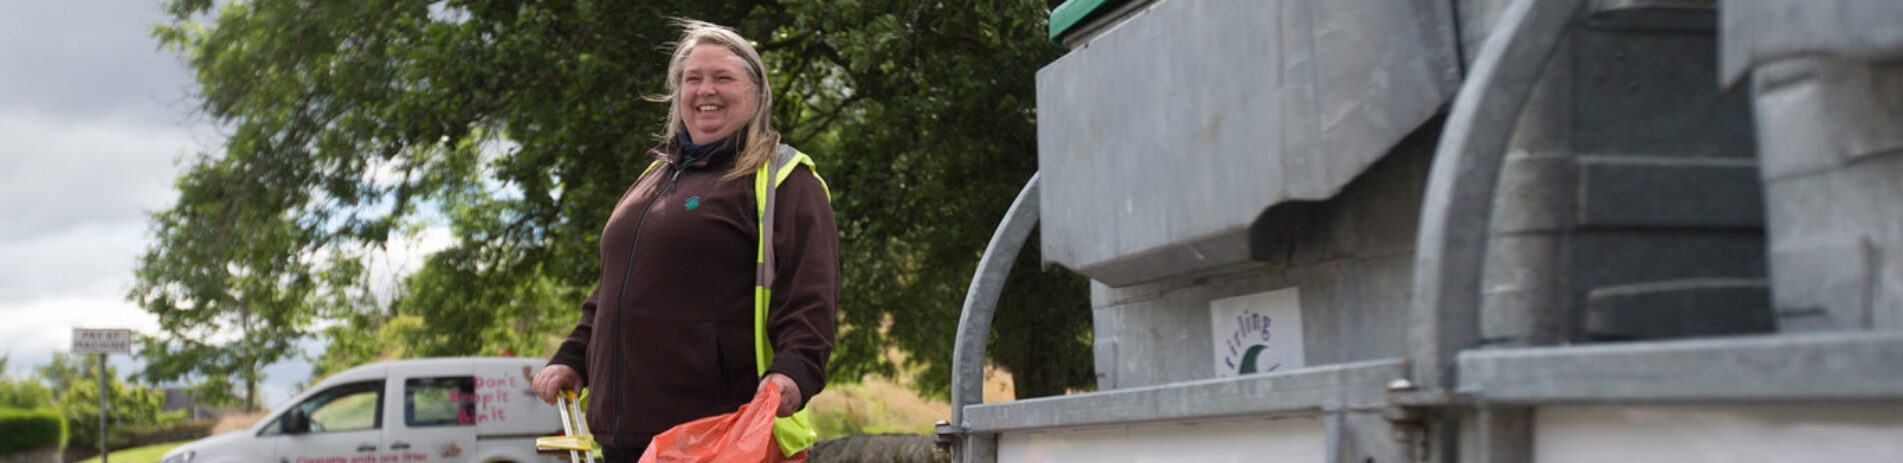 Stirling-Council-staff-member-holding-litter-picker-and-bin-bag-next-to-bin